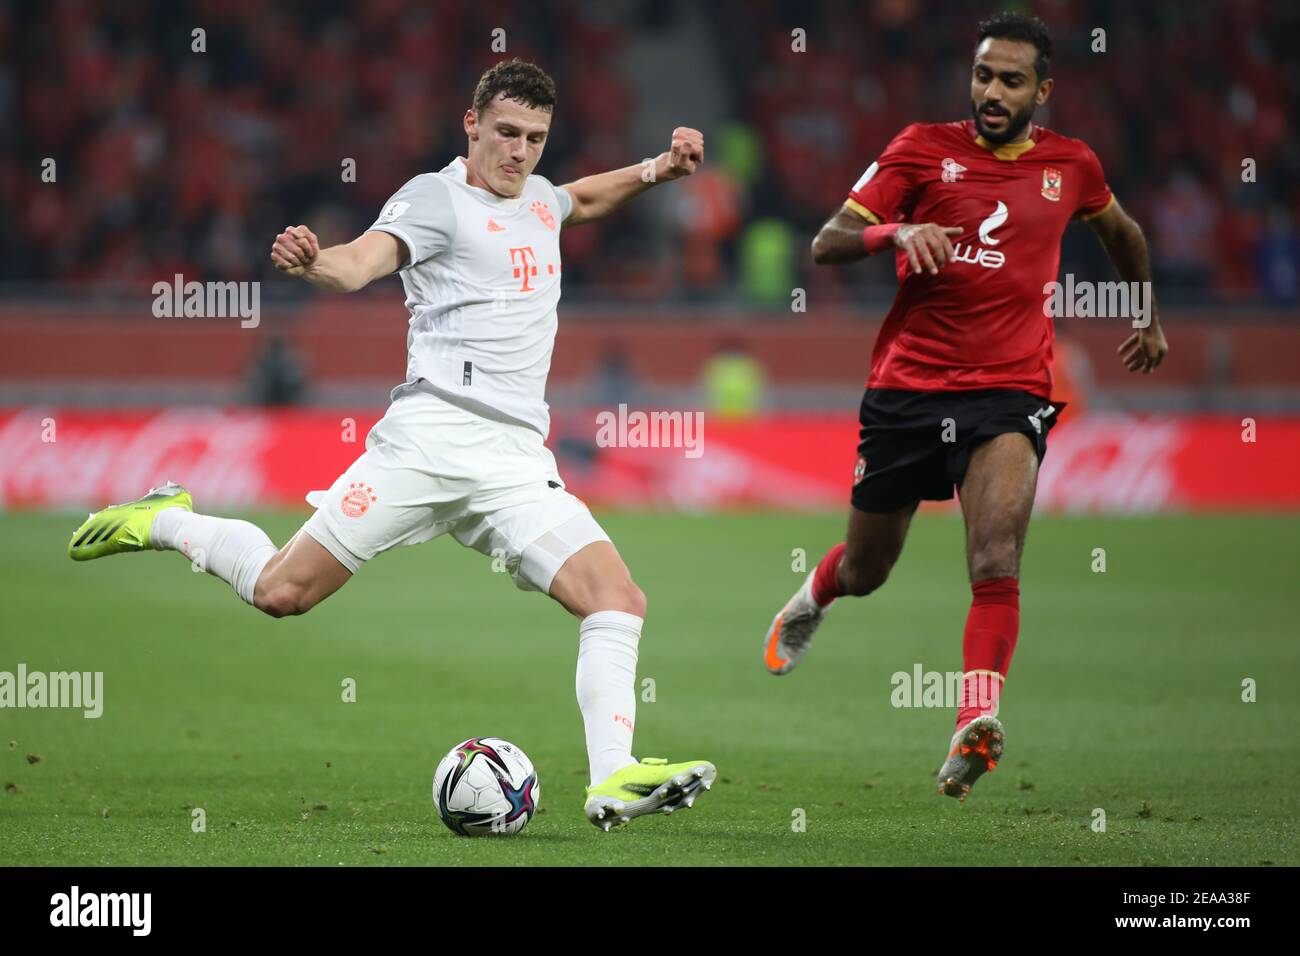 DOHA, QATAR - FEBRUARY 08: Kahraba of Al Ahly SX closes in on Benjamin Pavard of FC Bayern Muenchen as he crosses the ball into the box during the semi-final match between Al Ahly SC and FC Bayern Muenchen at Ahmad Bin Ali Stadium on February 8, 2021 in Doha, Qatar. (Photo by Colin McPhedran/MB Media) Stock Photo